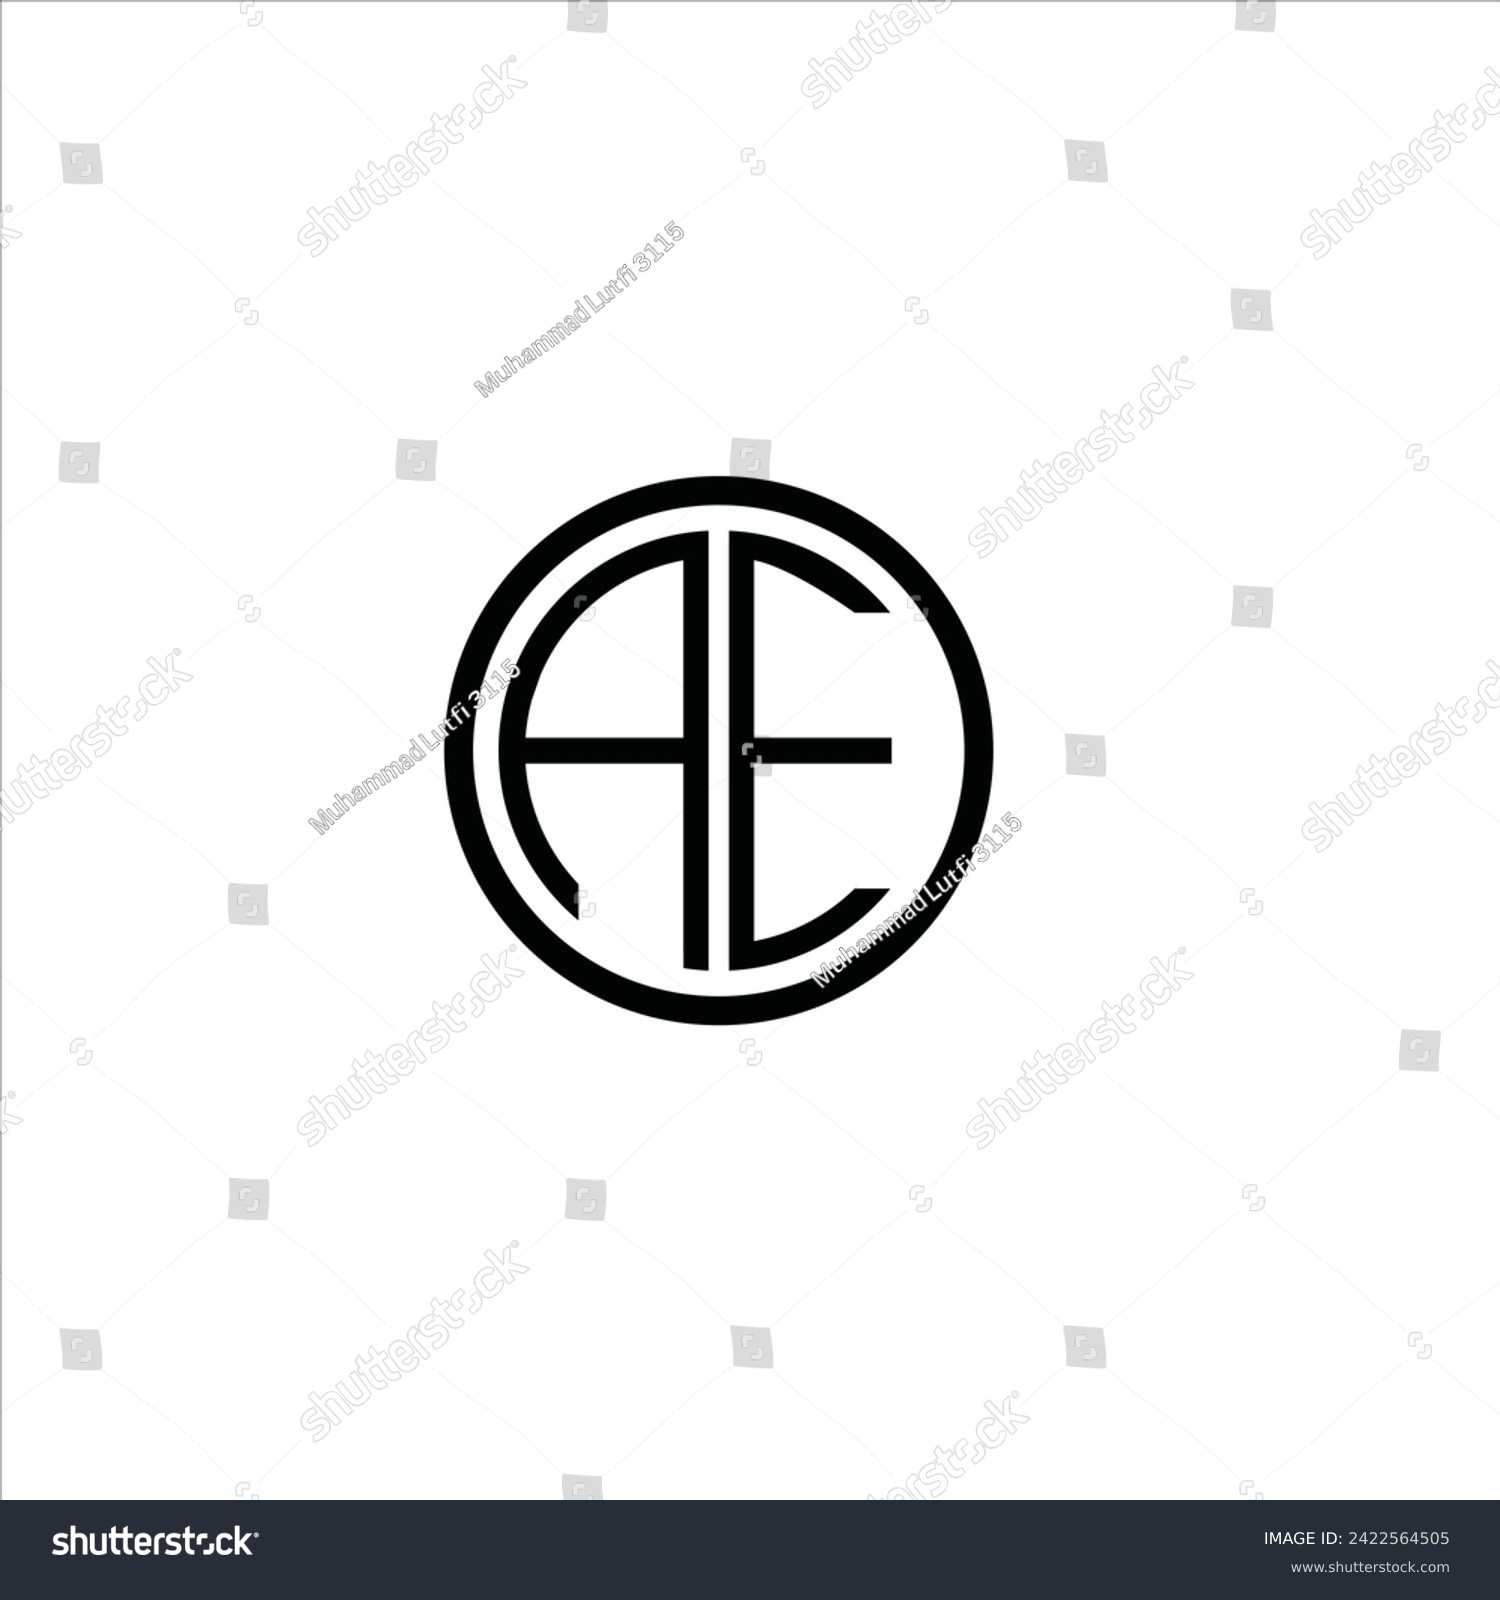 SVG of AE letter logo design template. AE initials logo or icon svg